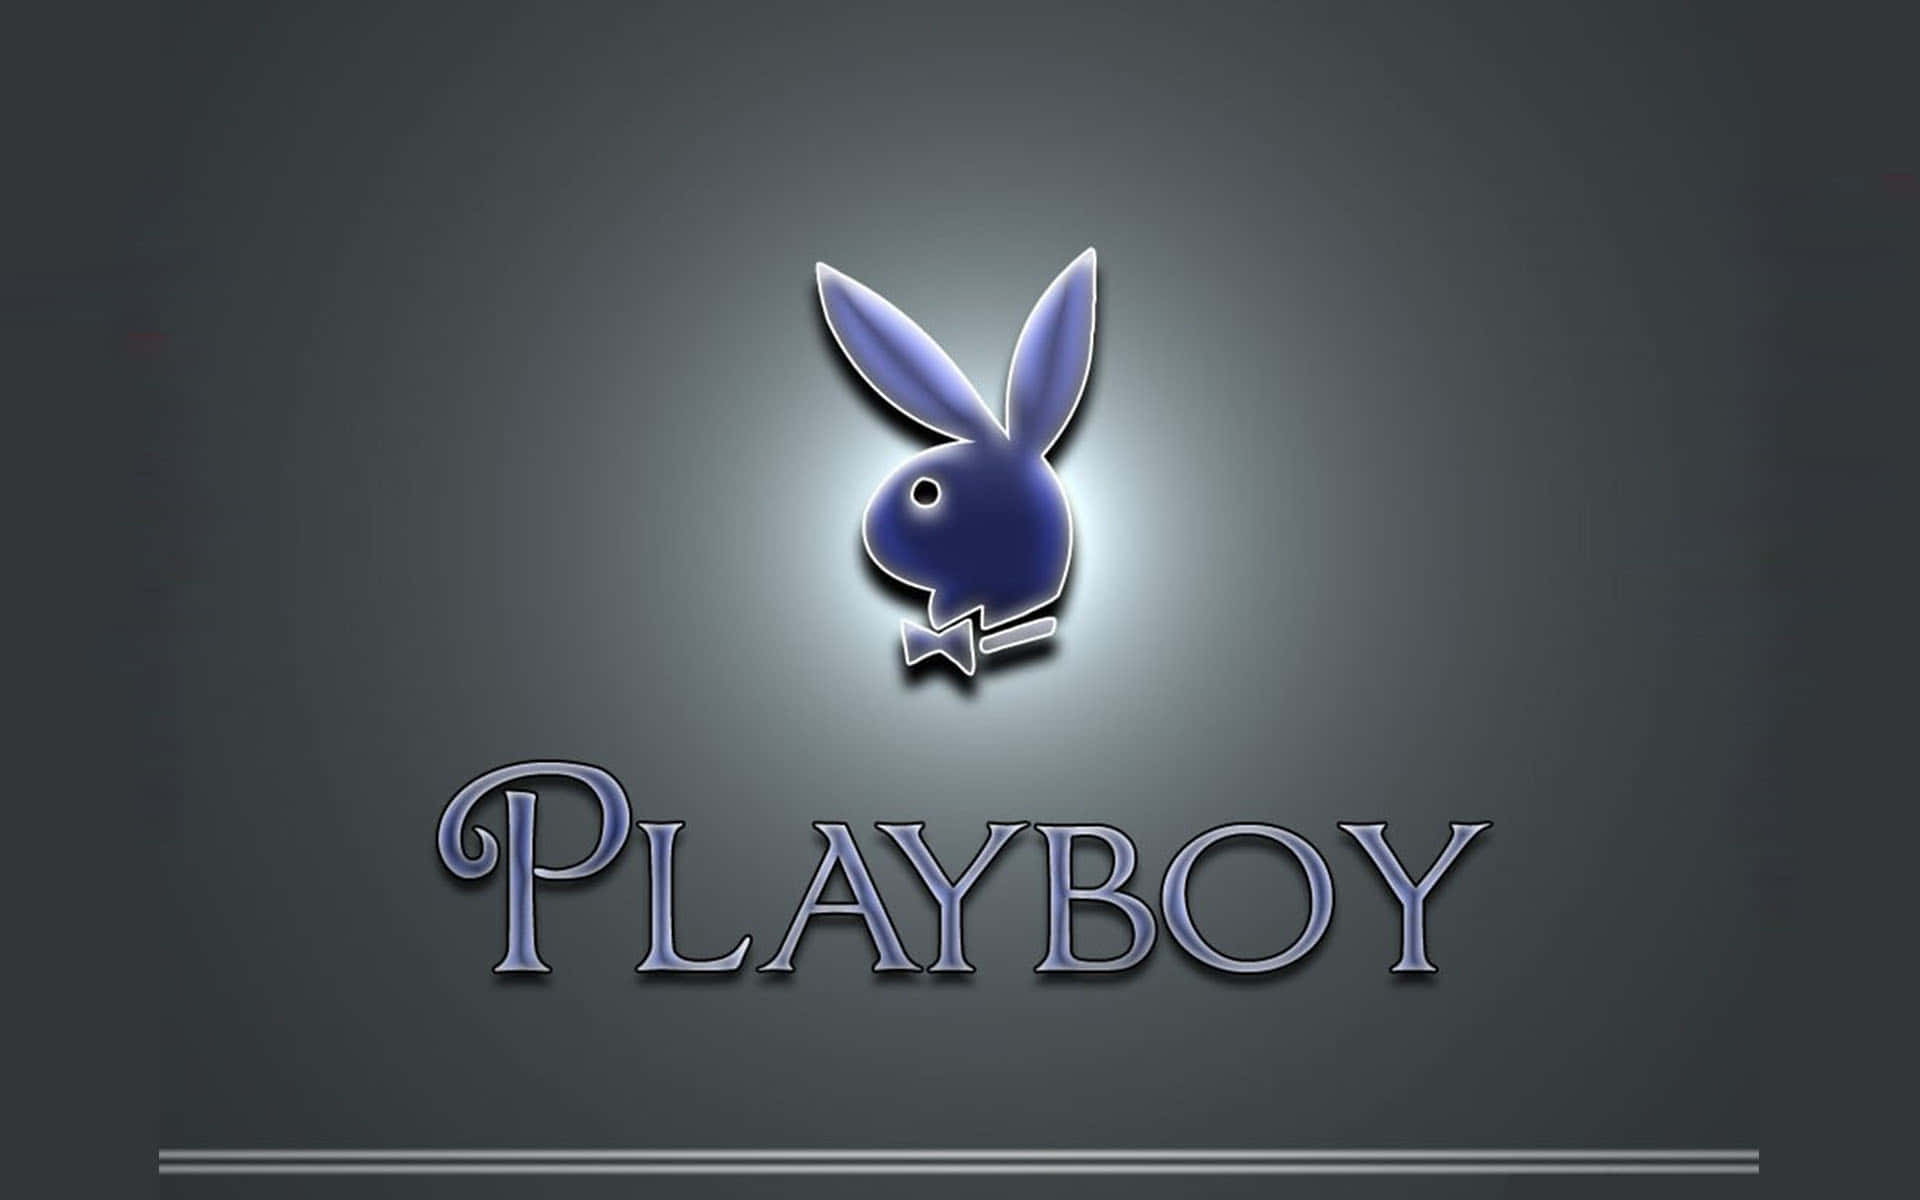 “The Magic of Playboy”